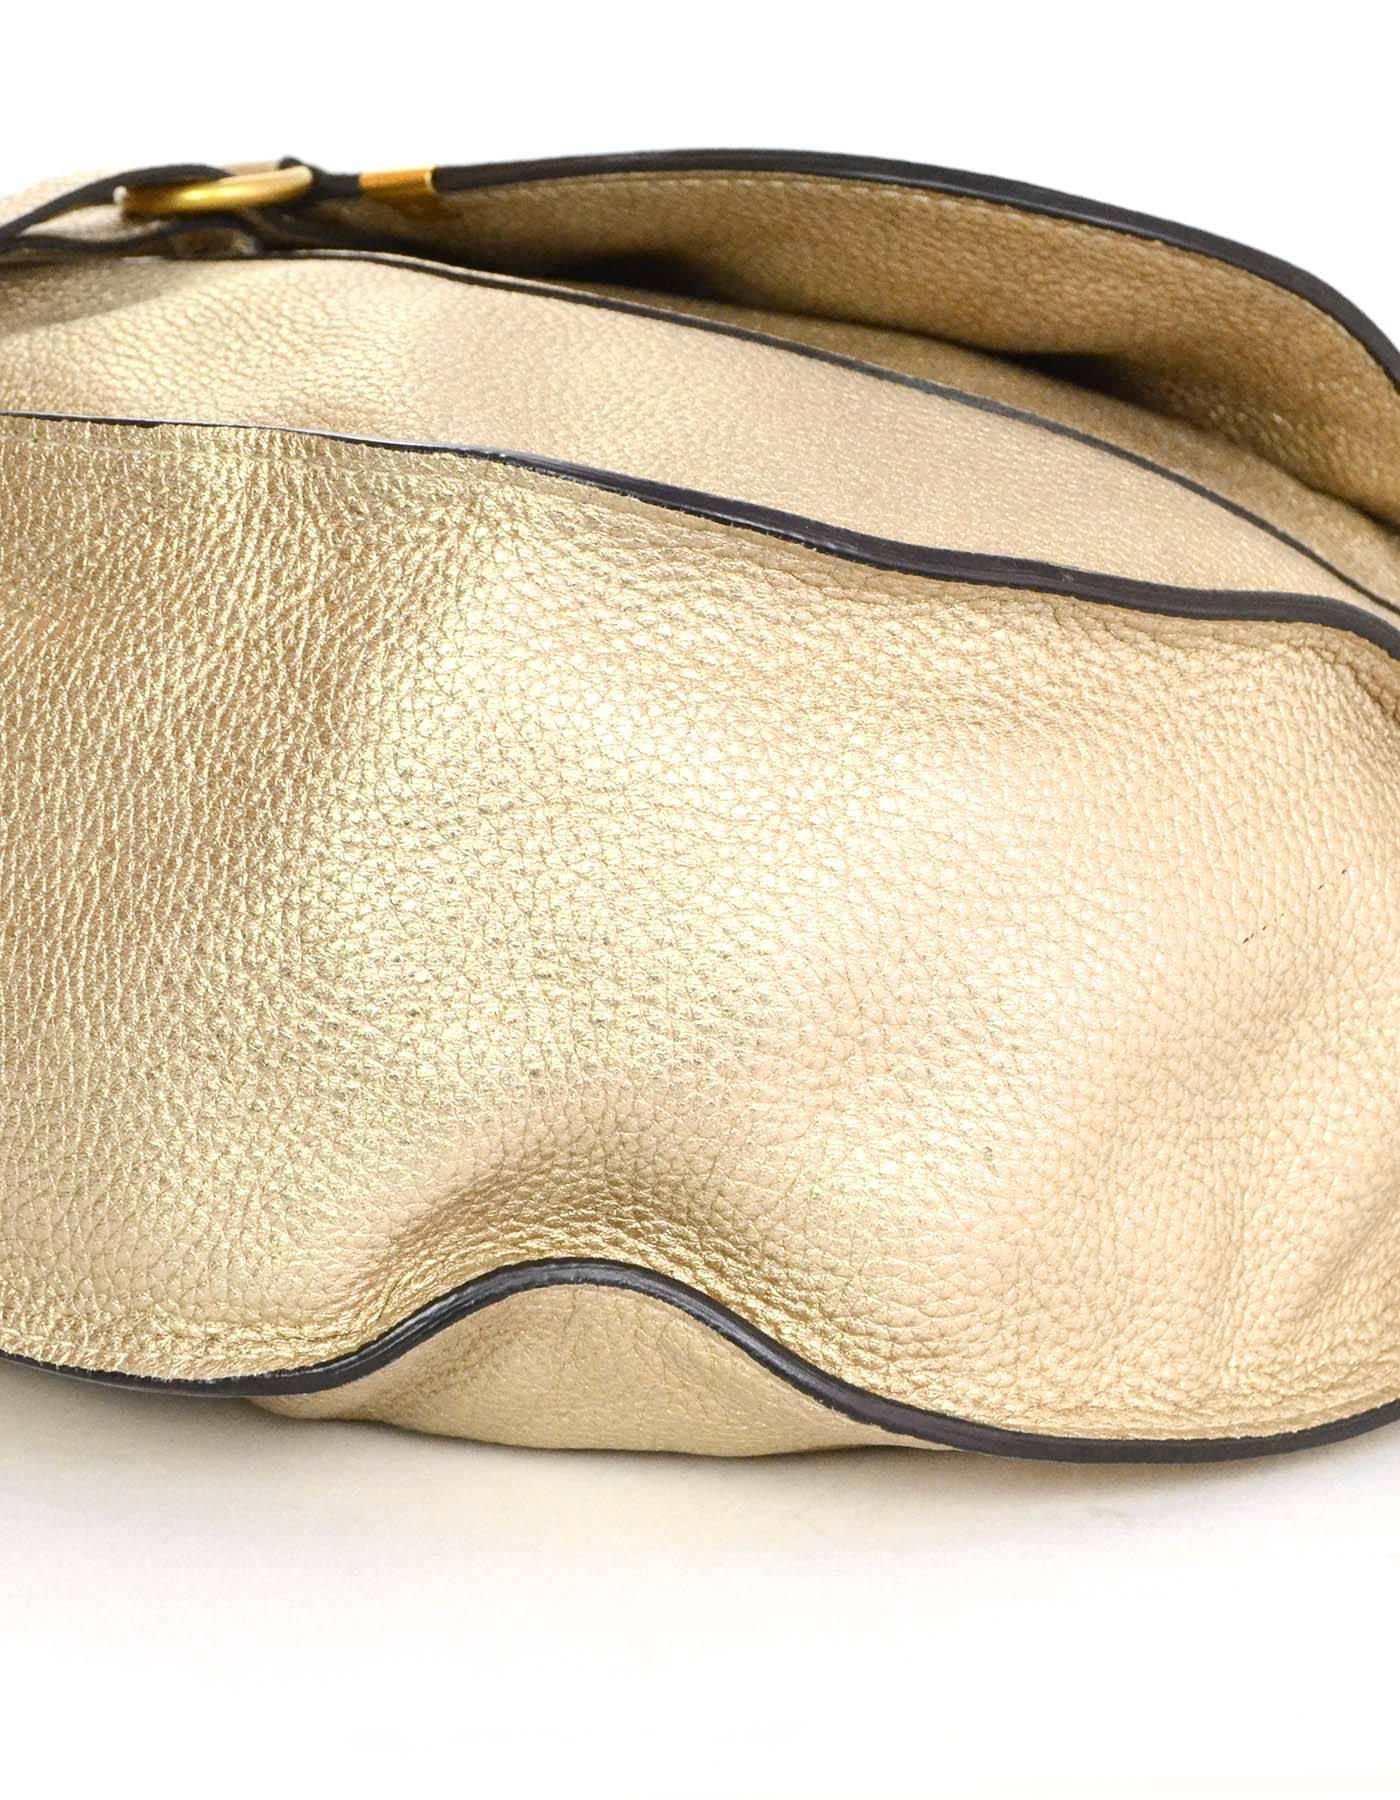 Chloe Gold Leather Large Marcie Hobo Bag with GHW 1